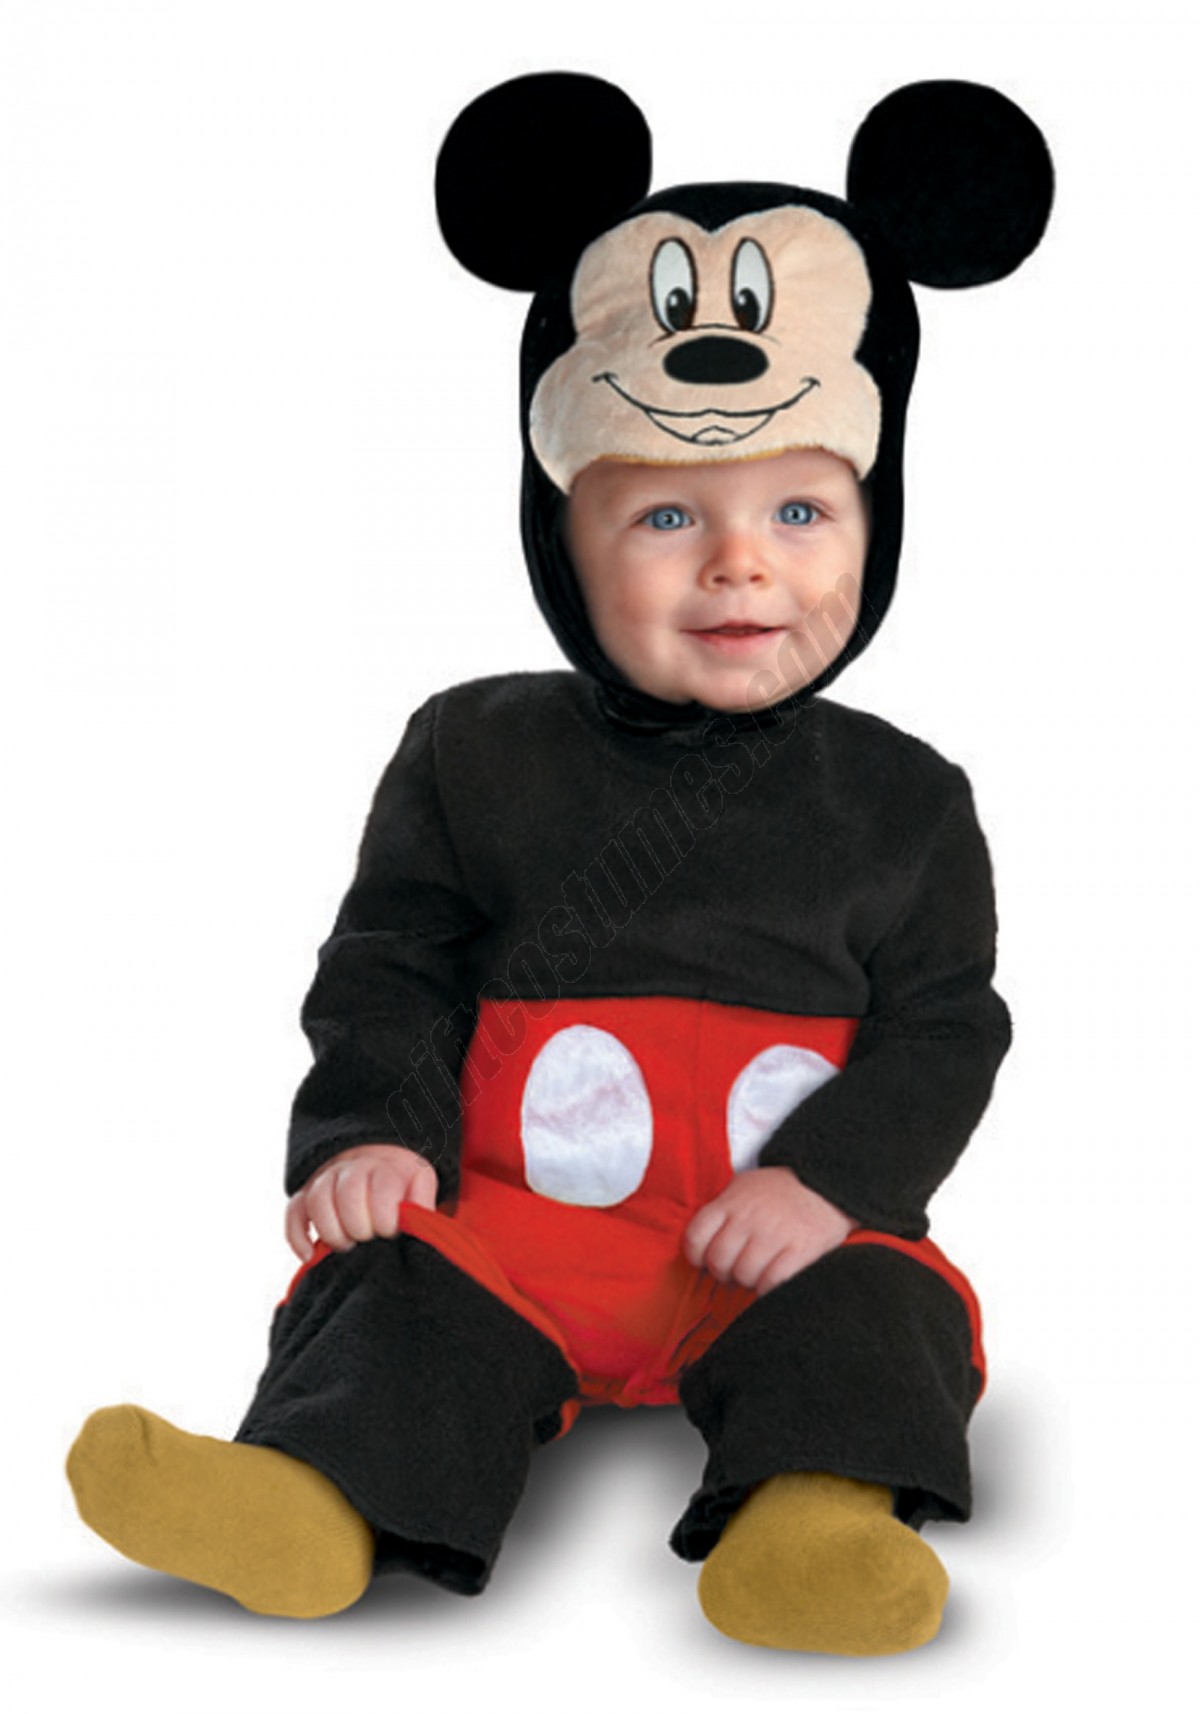 Infant Mickey Mouse My First Disney Costume Promotions - -0